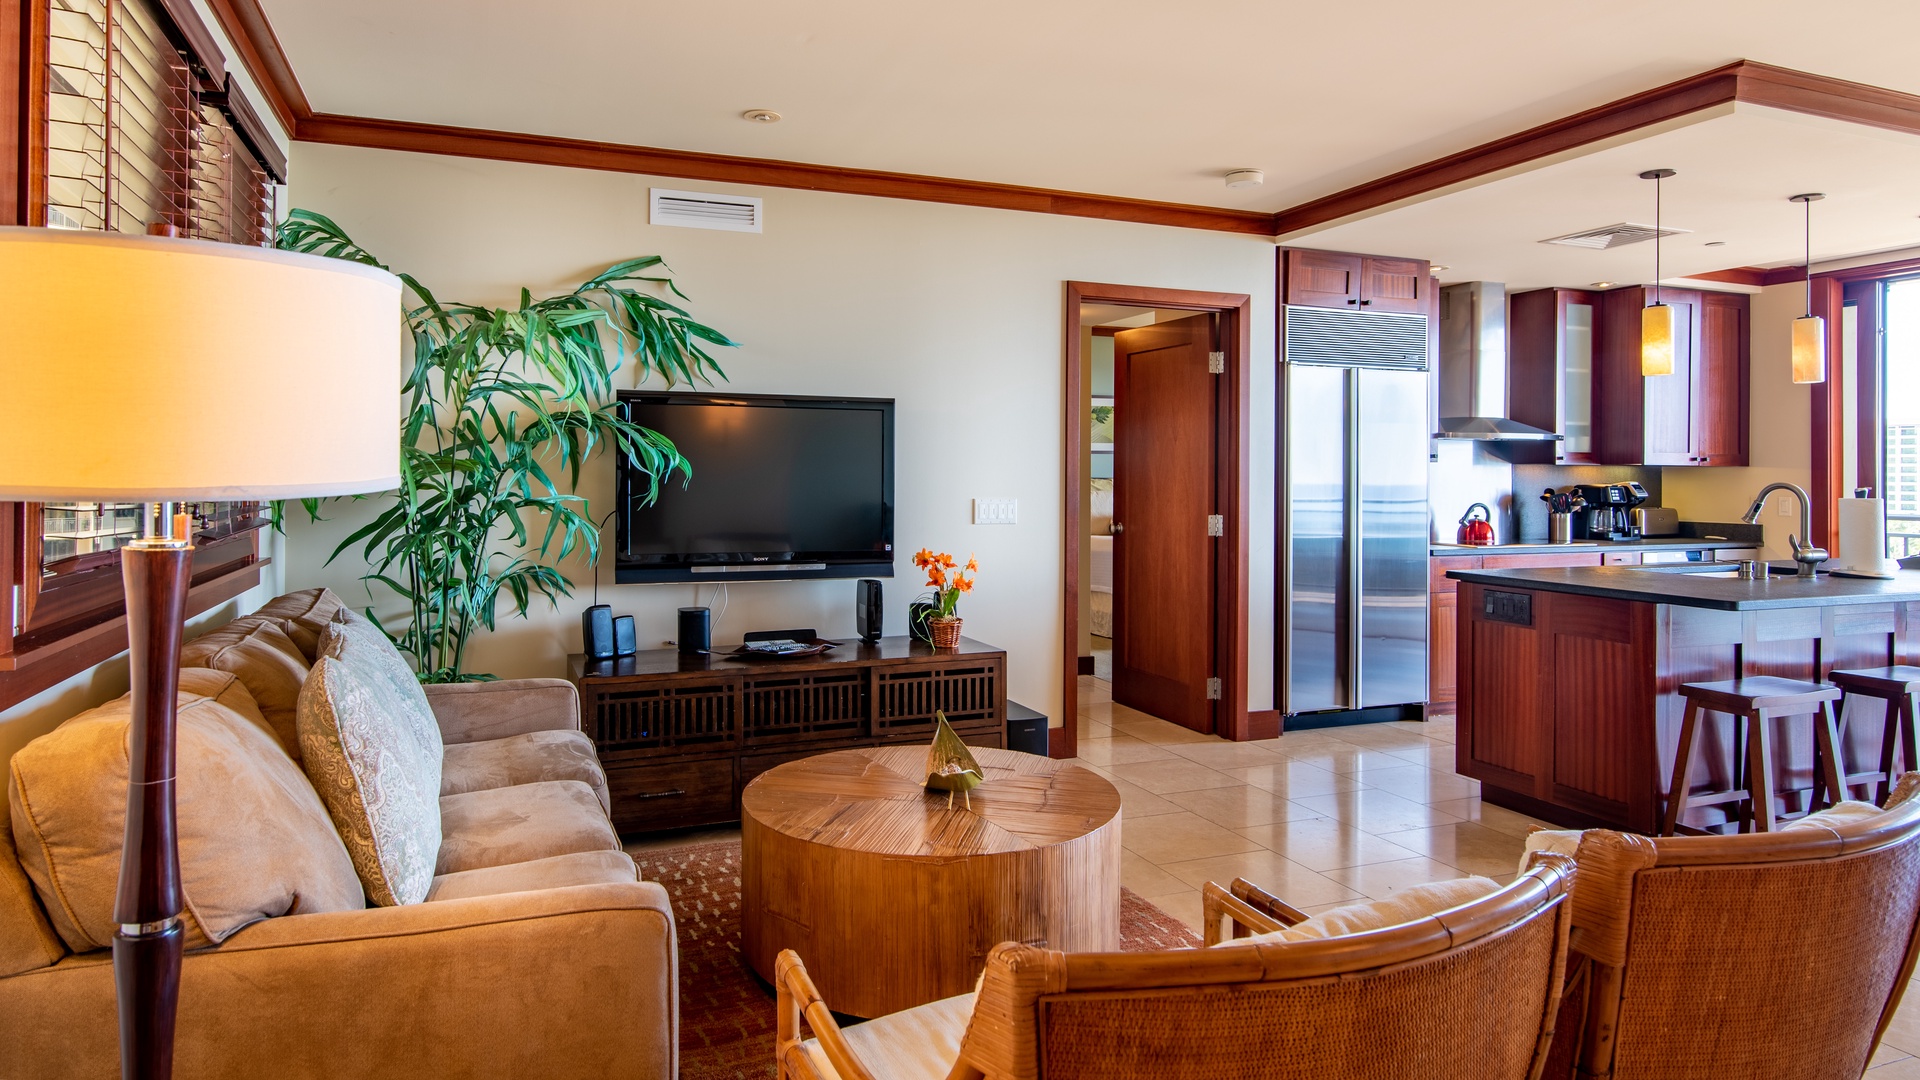 Kapolei Vacation Rentals, Ko Olina Beach Villas B901 - Relax during movie night or curl up with a good book in this comfortable living area.